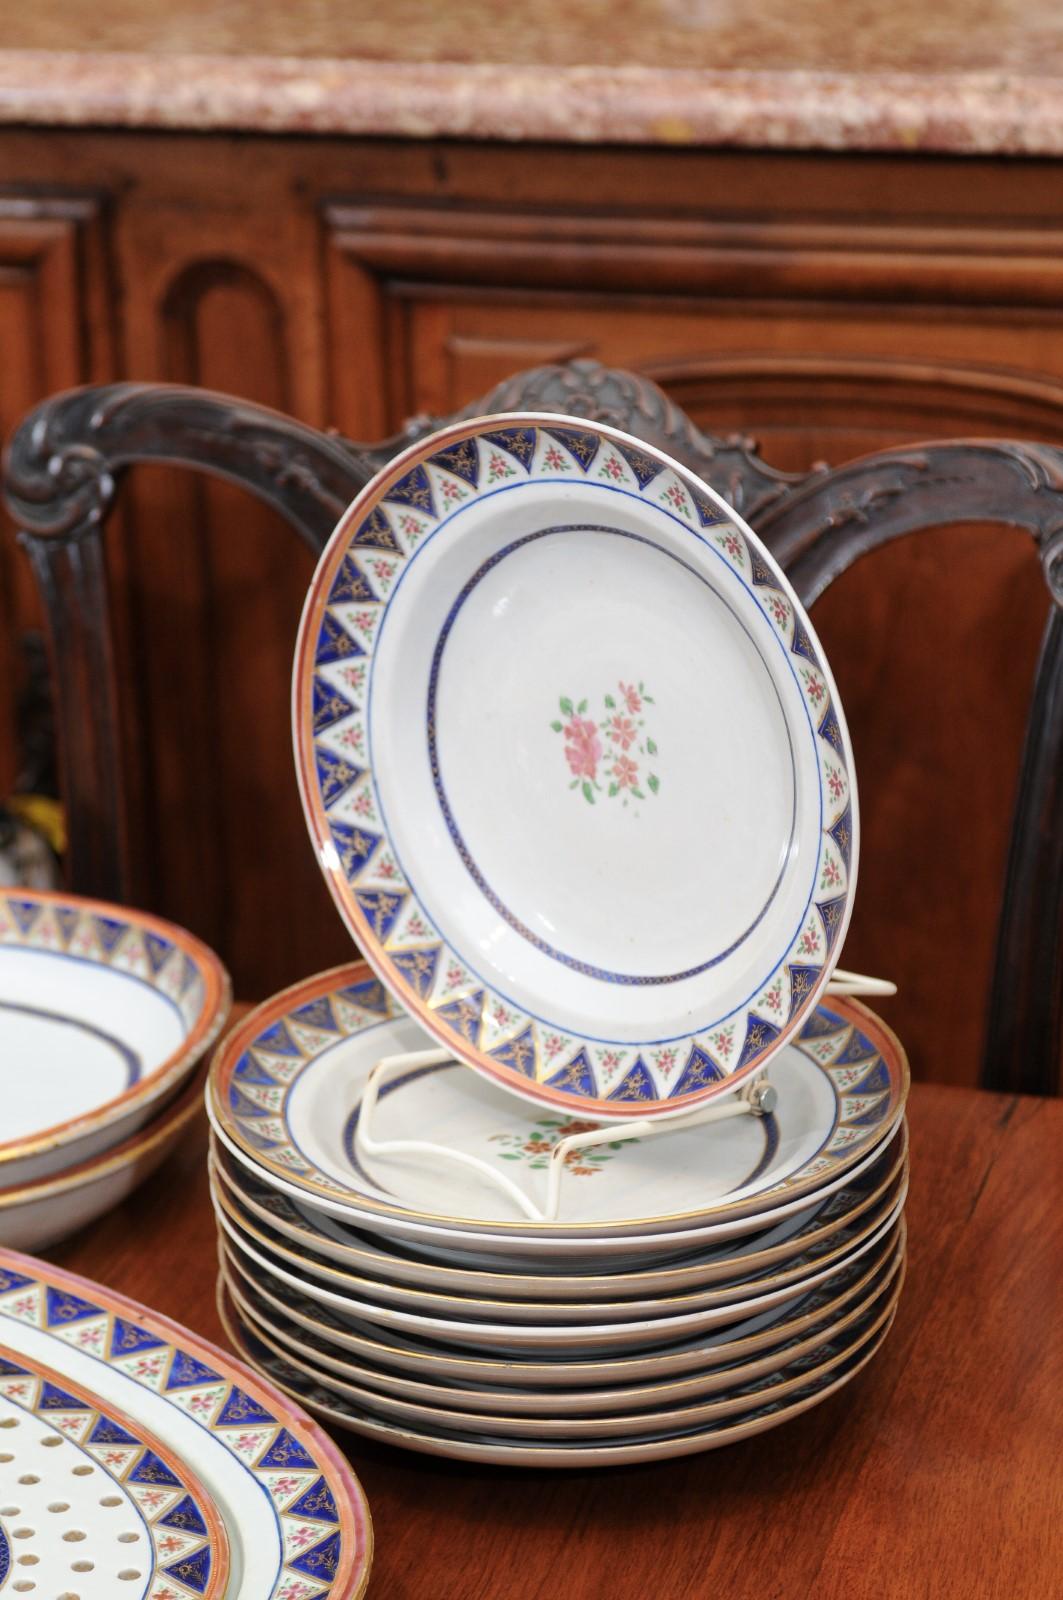 19th C. Chinese Export Famille Rose Porcelain Part-Dinner Service, 45 Piece Set For Sale 10